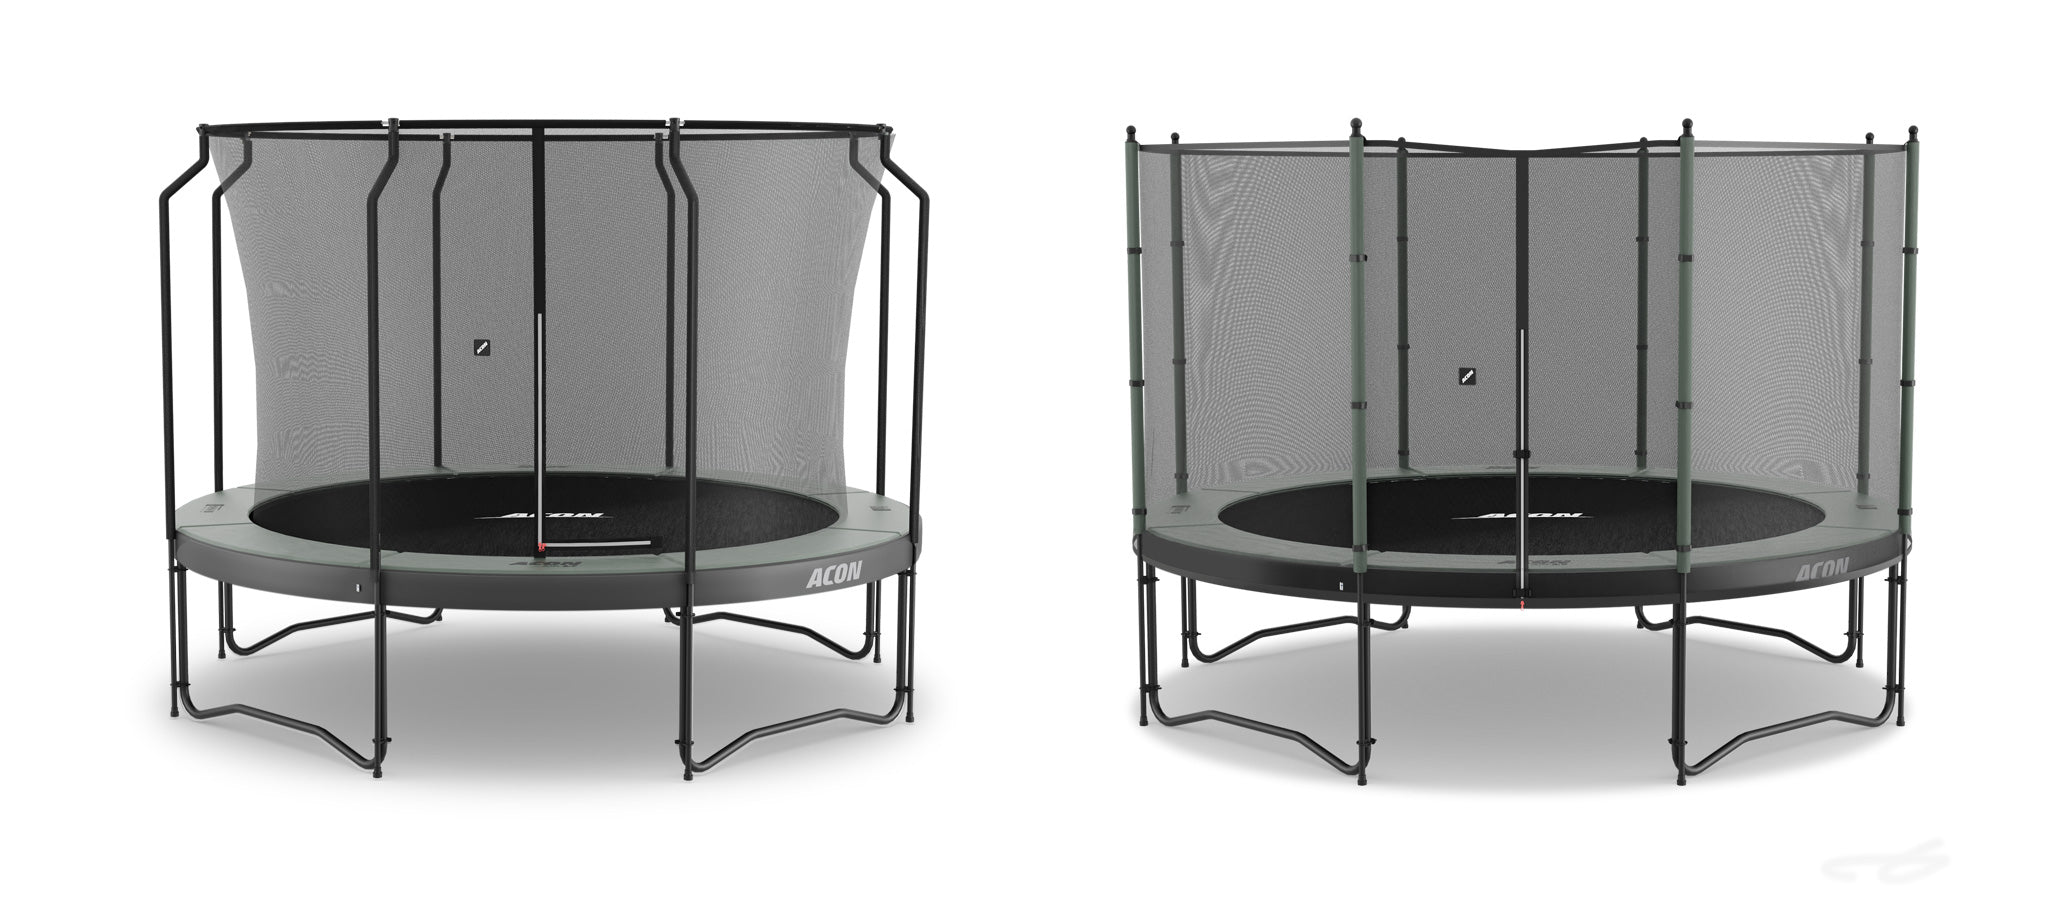 Two 3,7m round trampolines with enclosures. One has a premium trampoline enclosure and the other has a standard one. The premium enclosure is installed inside the springs